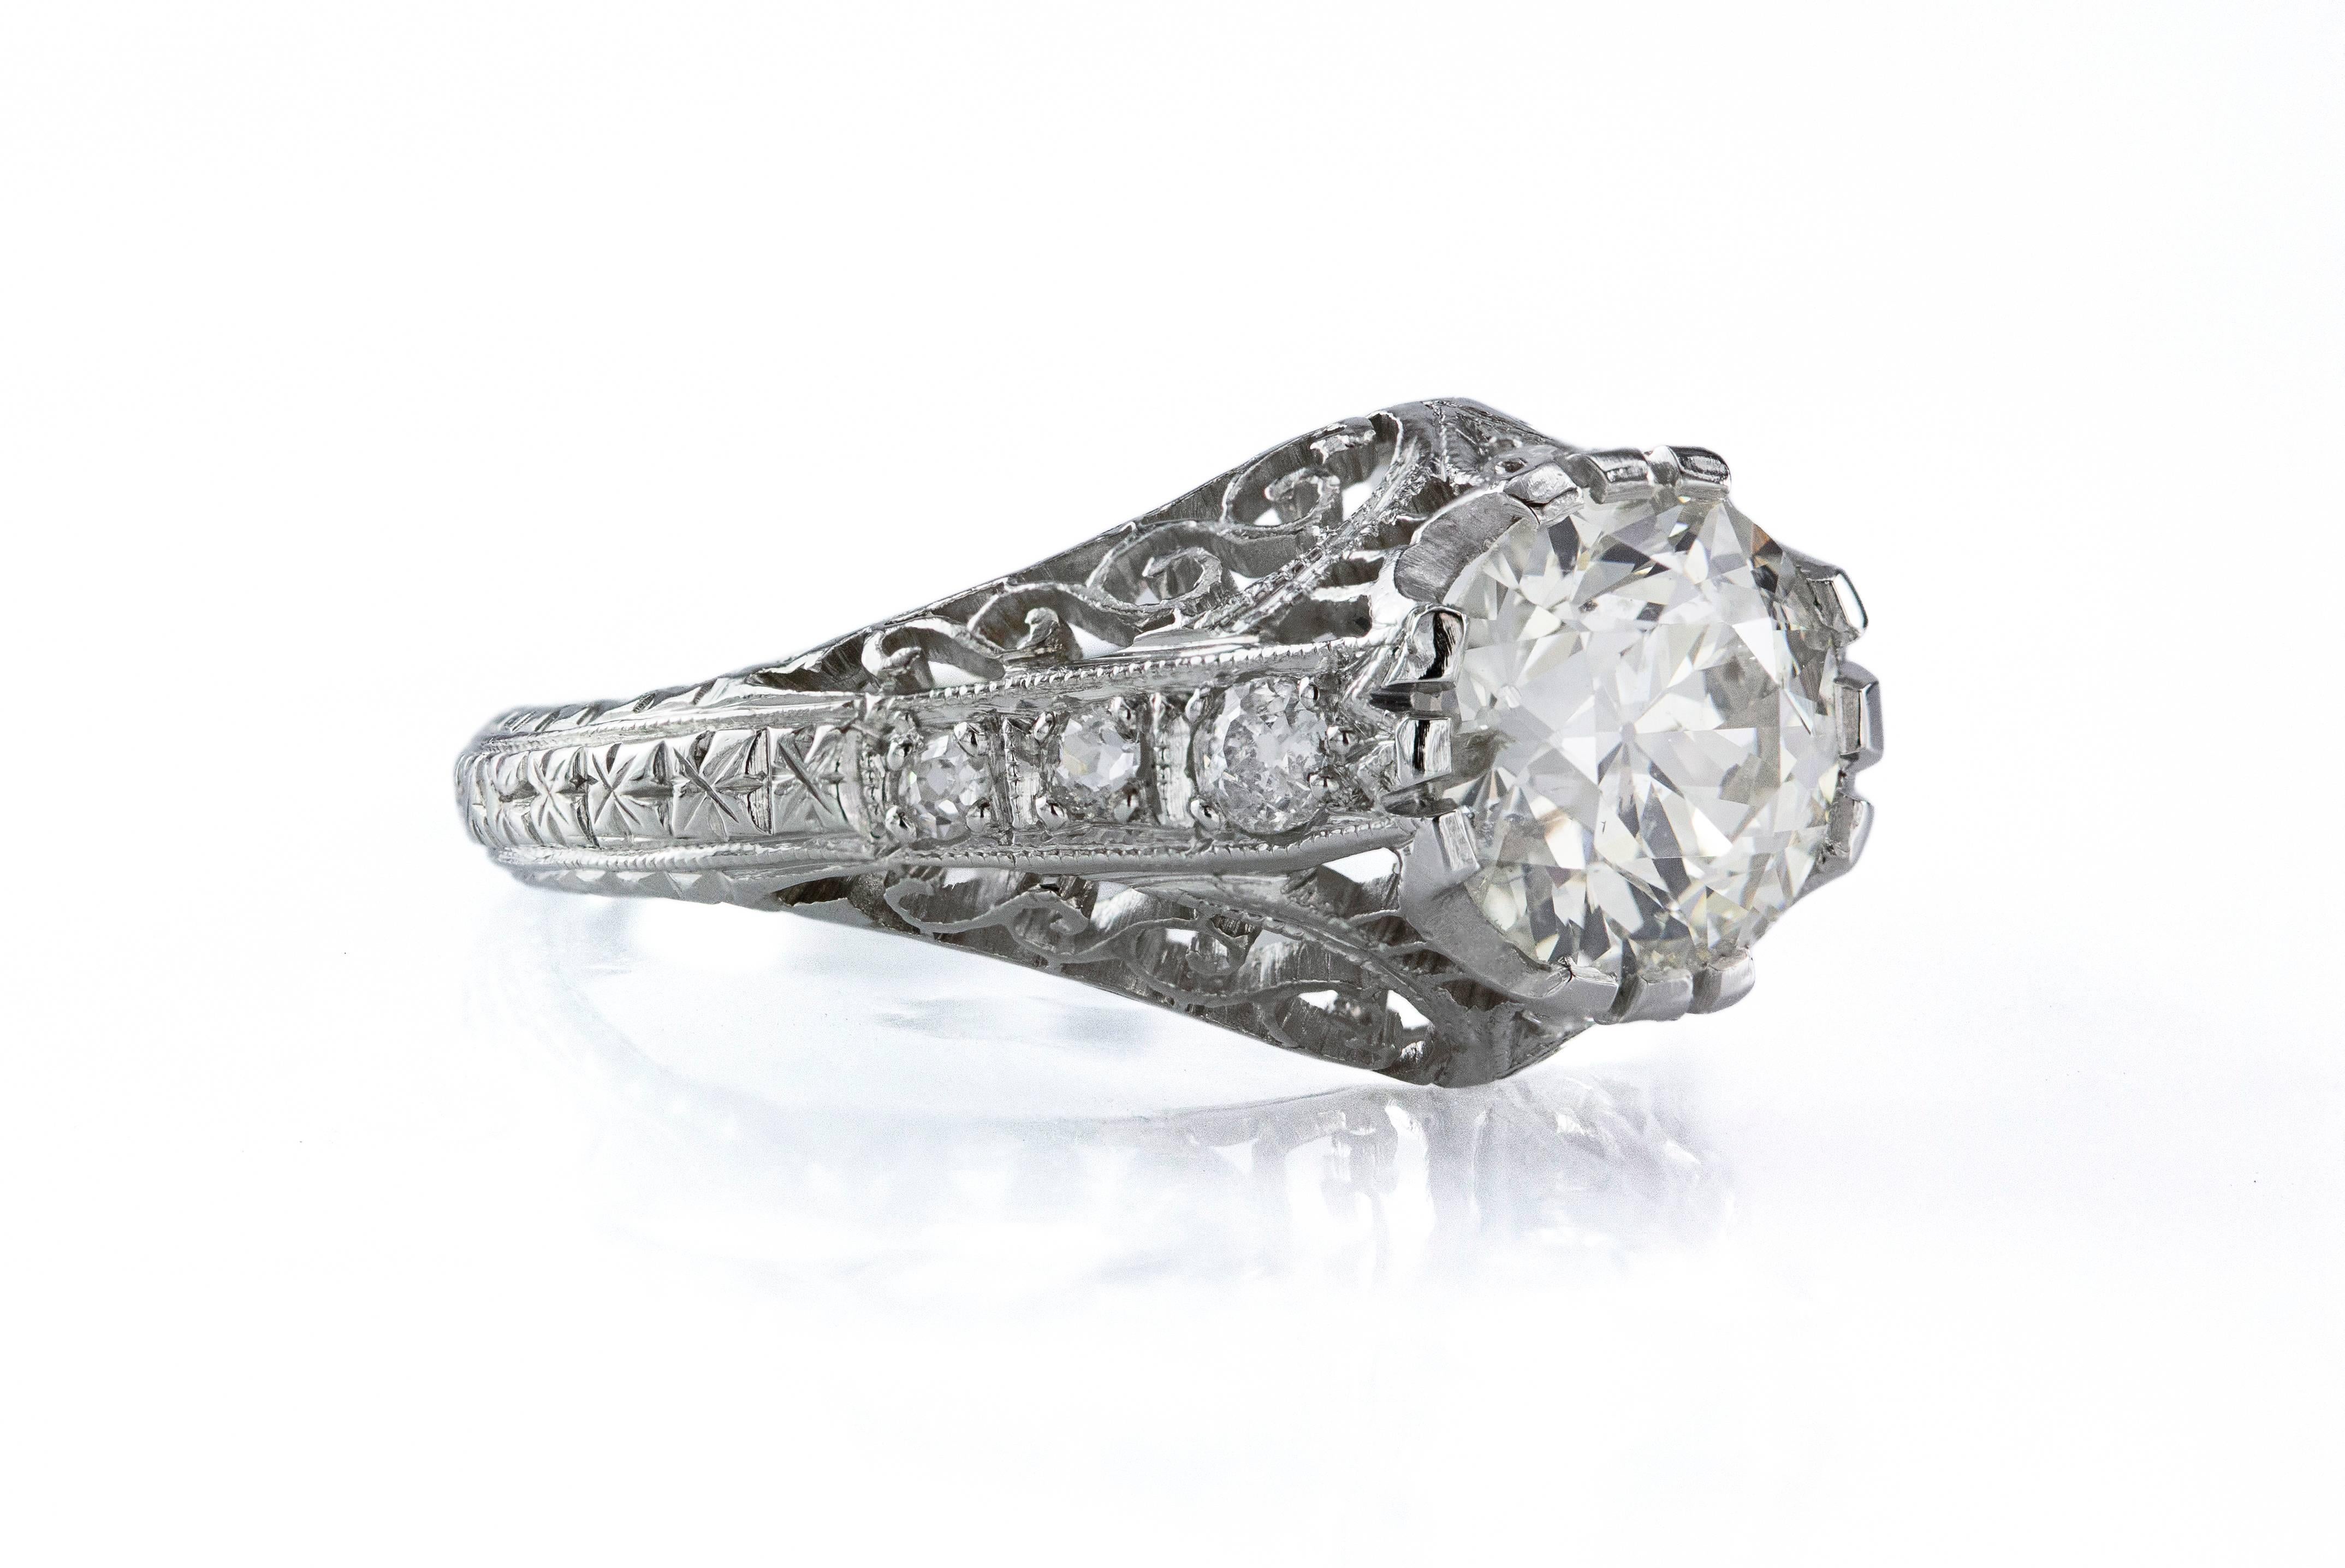 This antique ring features a brilliant round diamond center stone set in a beautiful intricate design. The center stone weighs 1.61 carats. The center stone is accented with 3 brilliant round diamonds on each side weighing 0.19 carats total. Size is